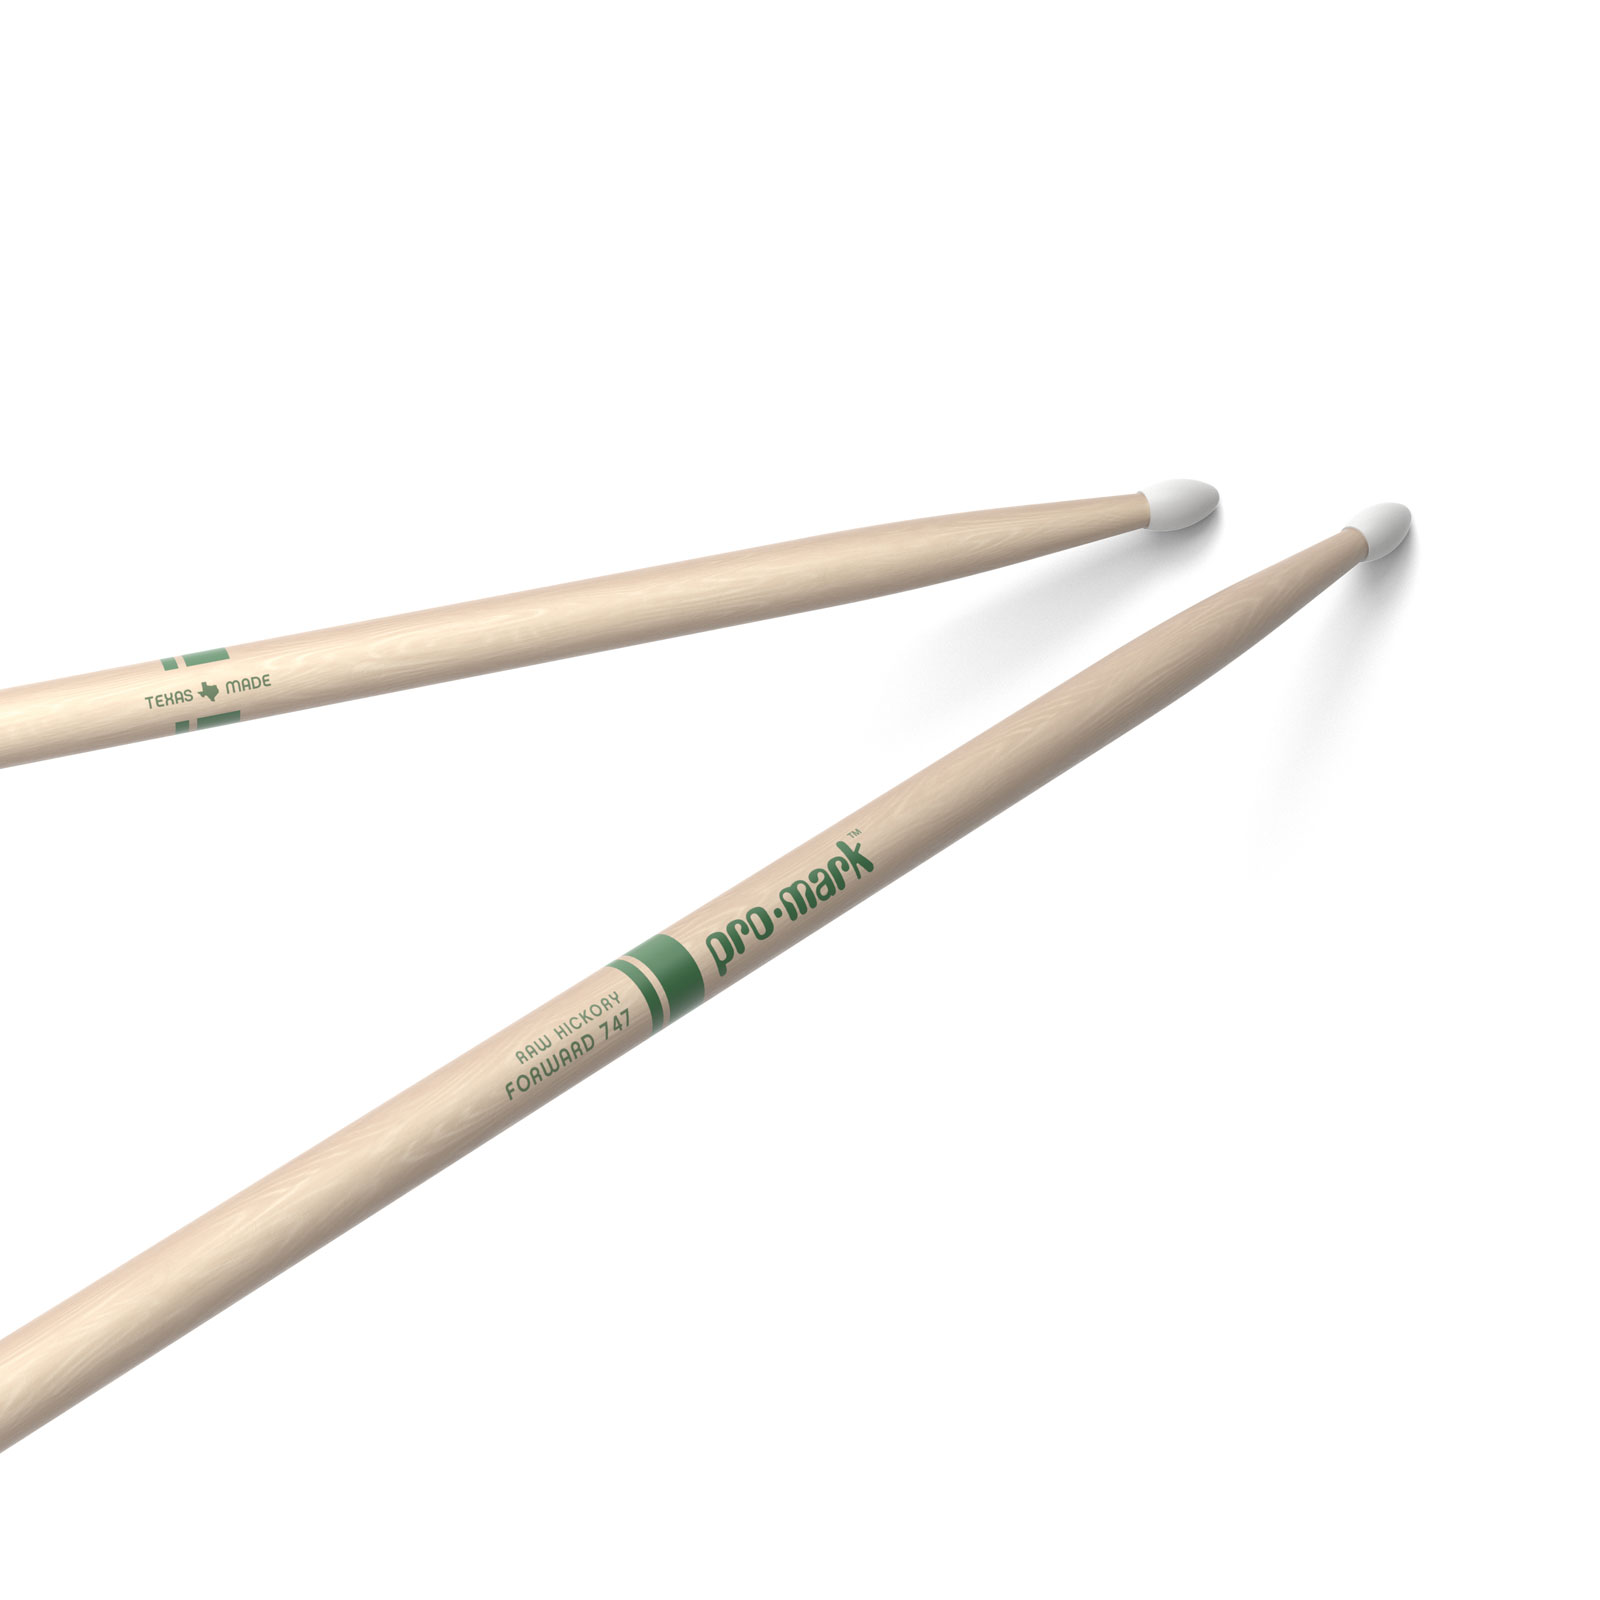 PRO MARK CLASSIC FORWARD 747 RAW HICKORY DRUMSTICK OVAL NYLON TIP